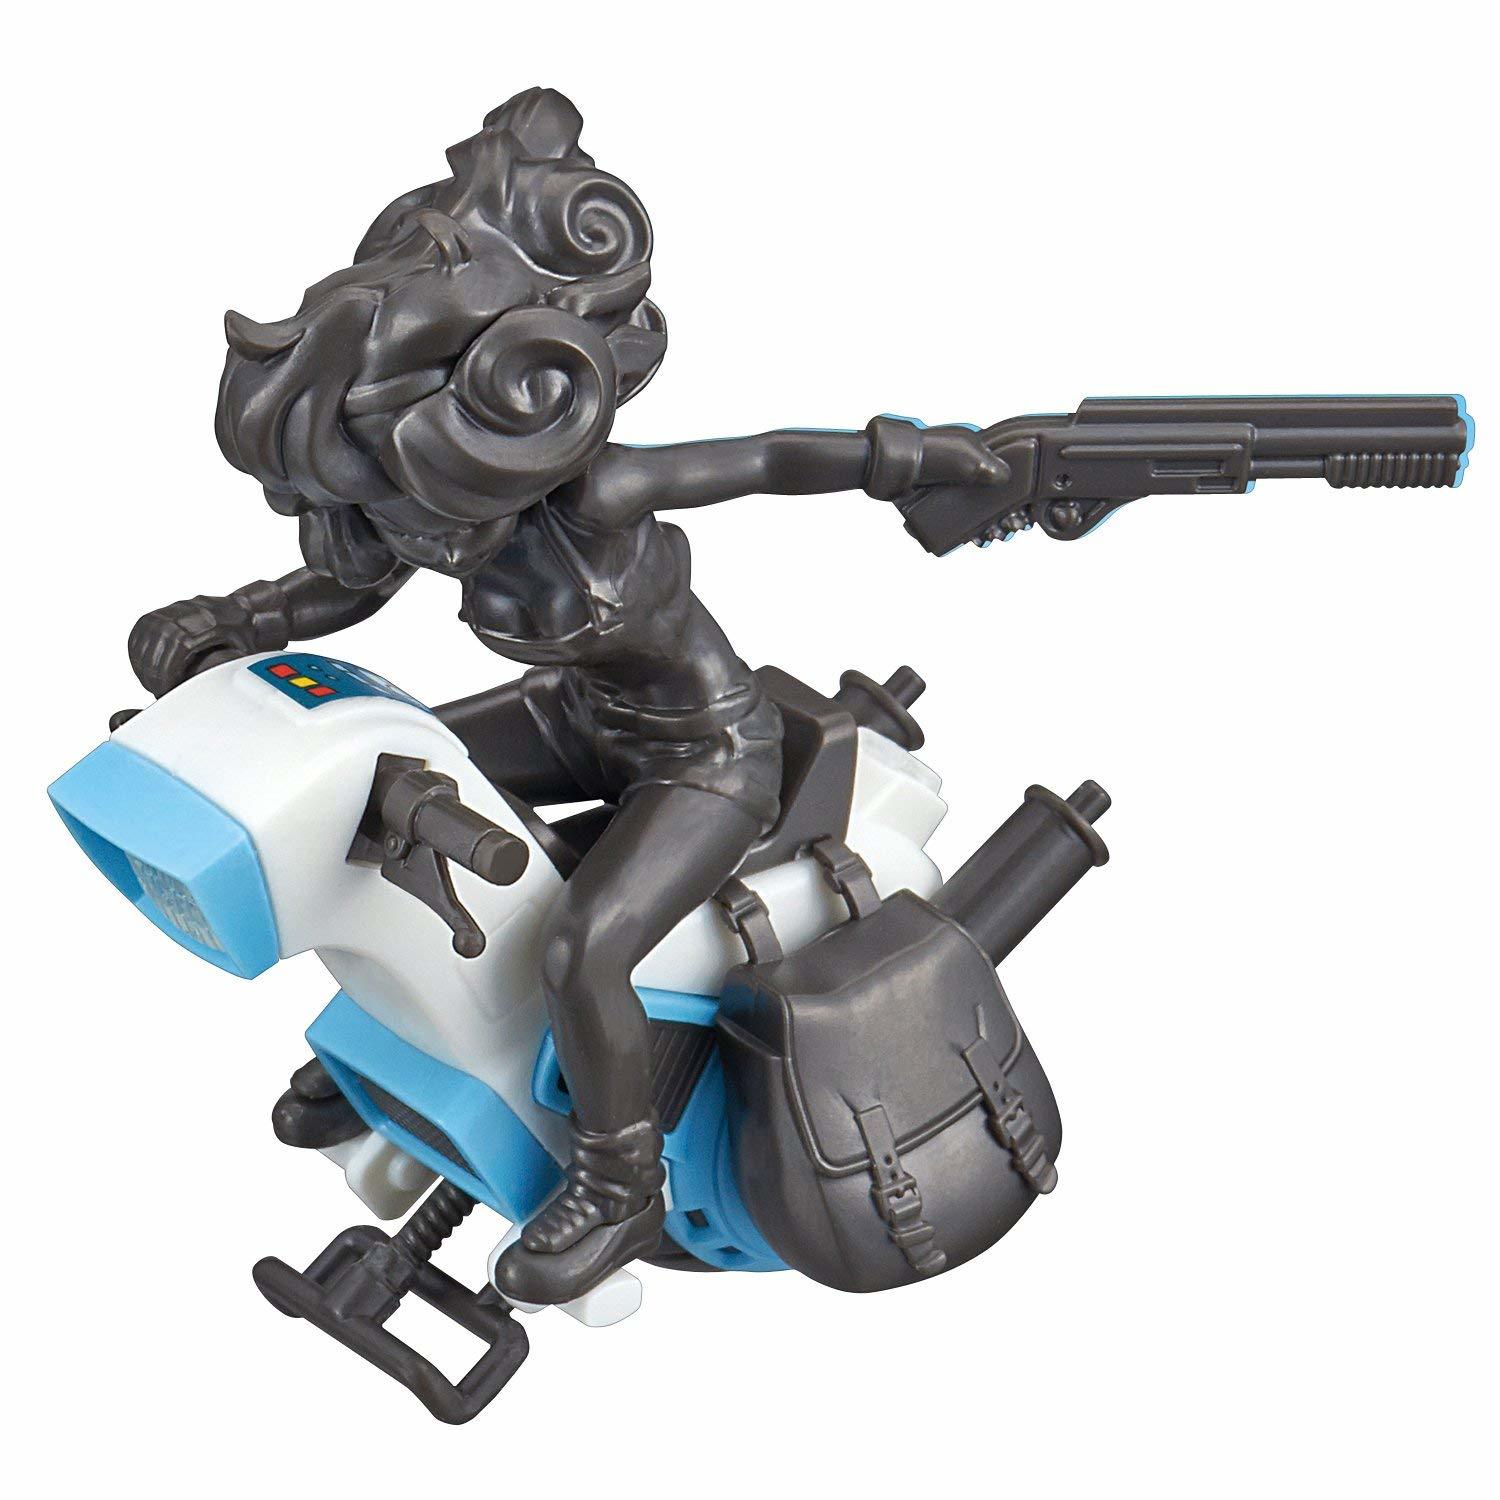 DRAGON BALL - MECHA COLLECTION VOL.3 LUNCH'S ONE-WHEEL MOTORCYCLE